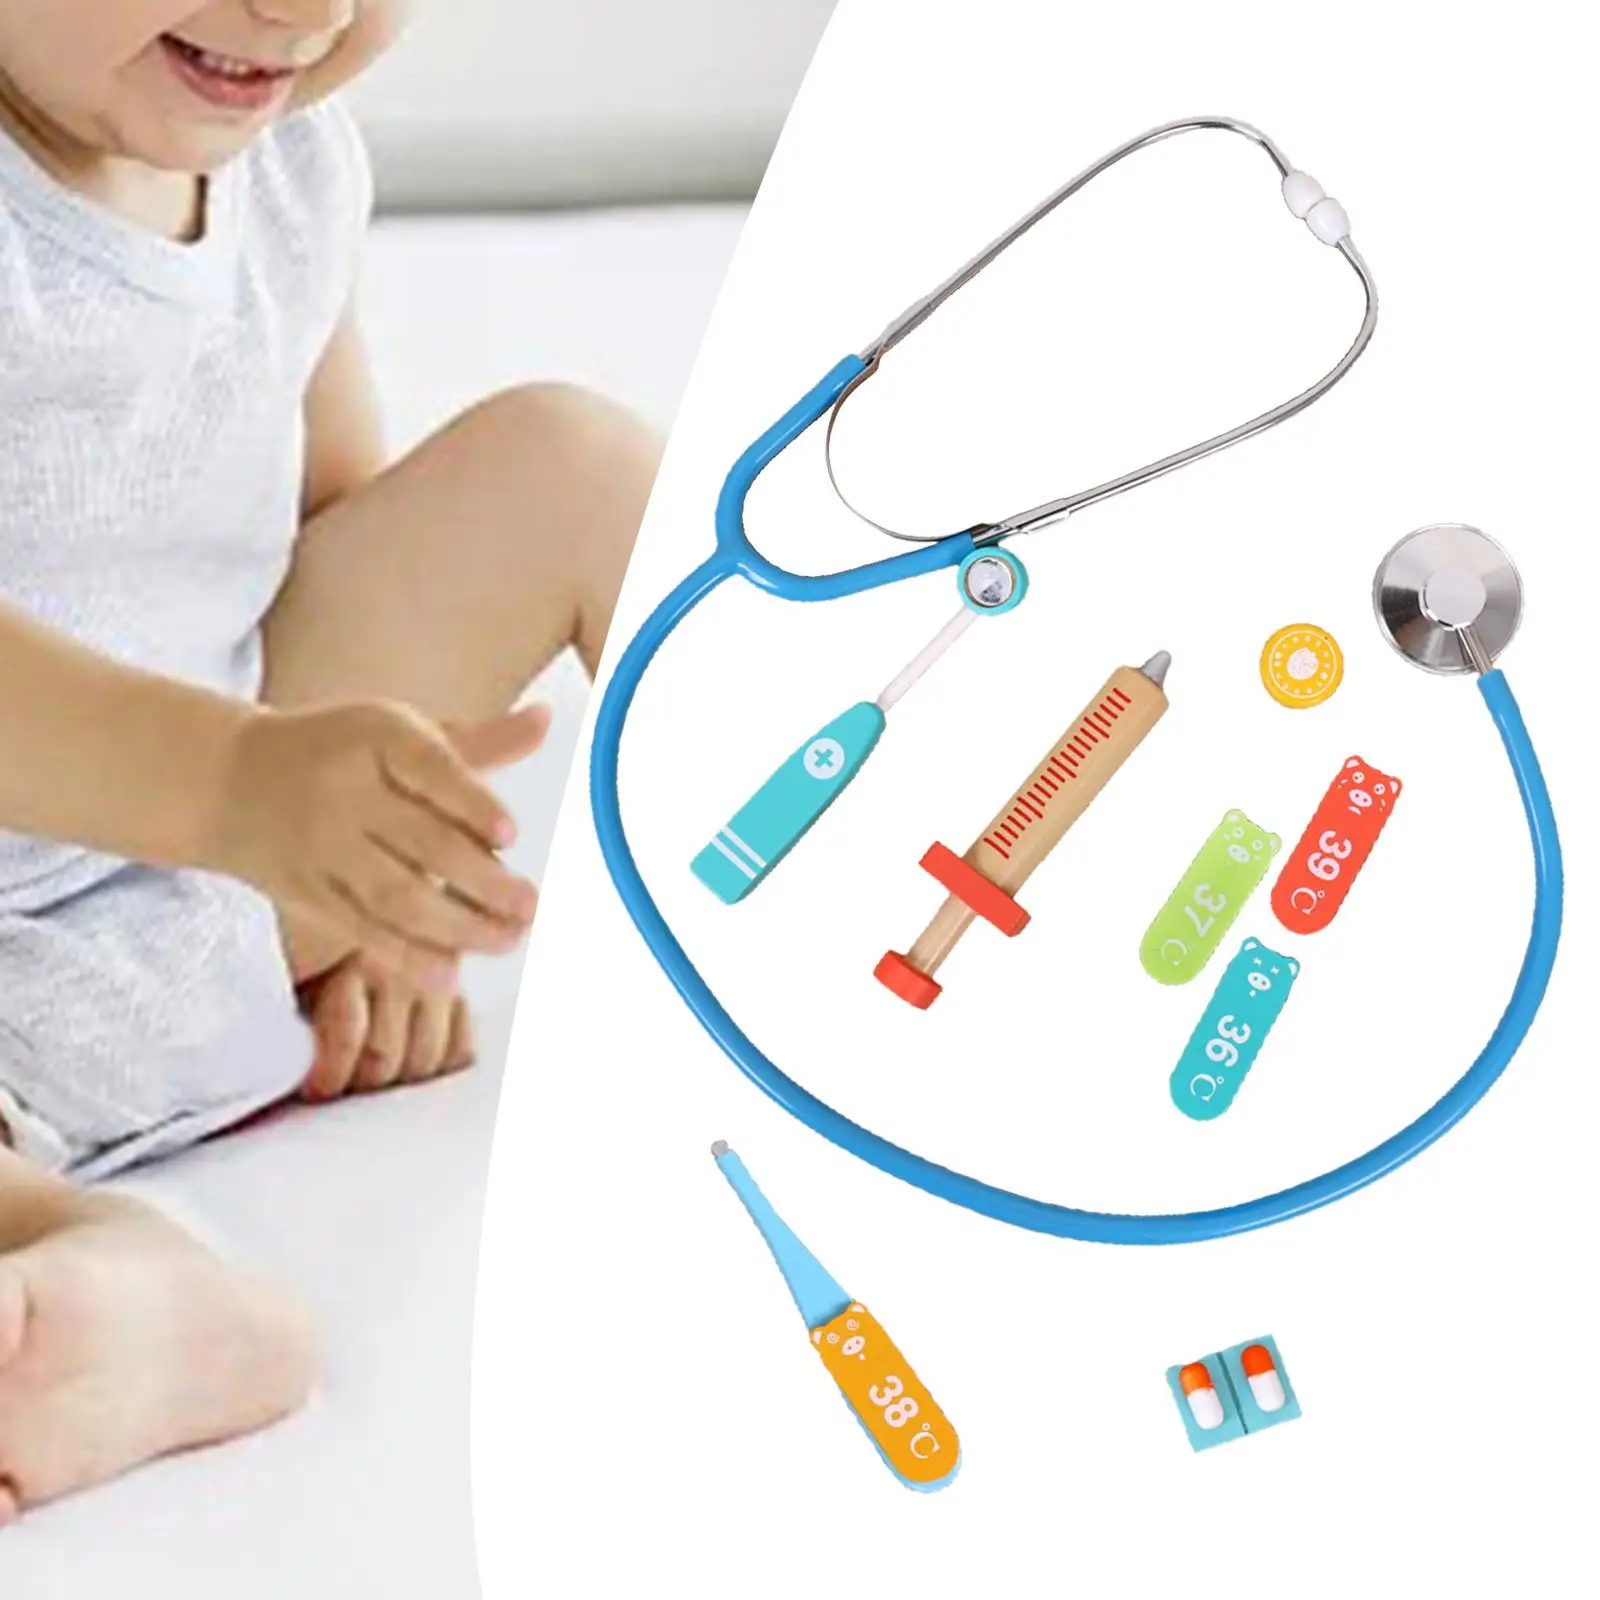 doctor Toy Kit Play Props Early Educational Toys Play House Toys Simulation Doctor Toy for Birthday Gifts Children Boys